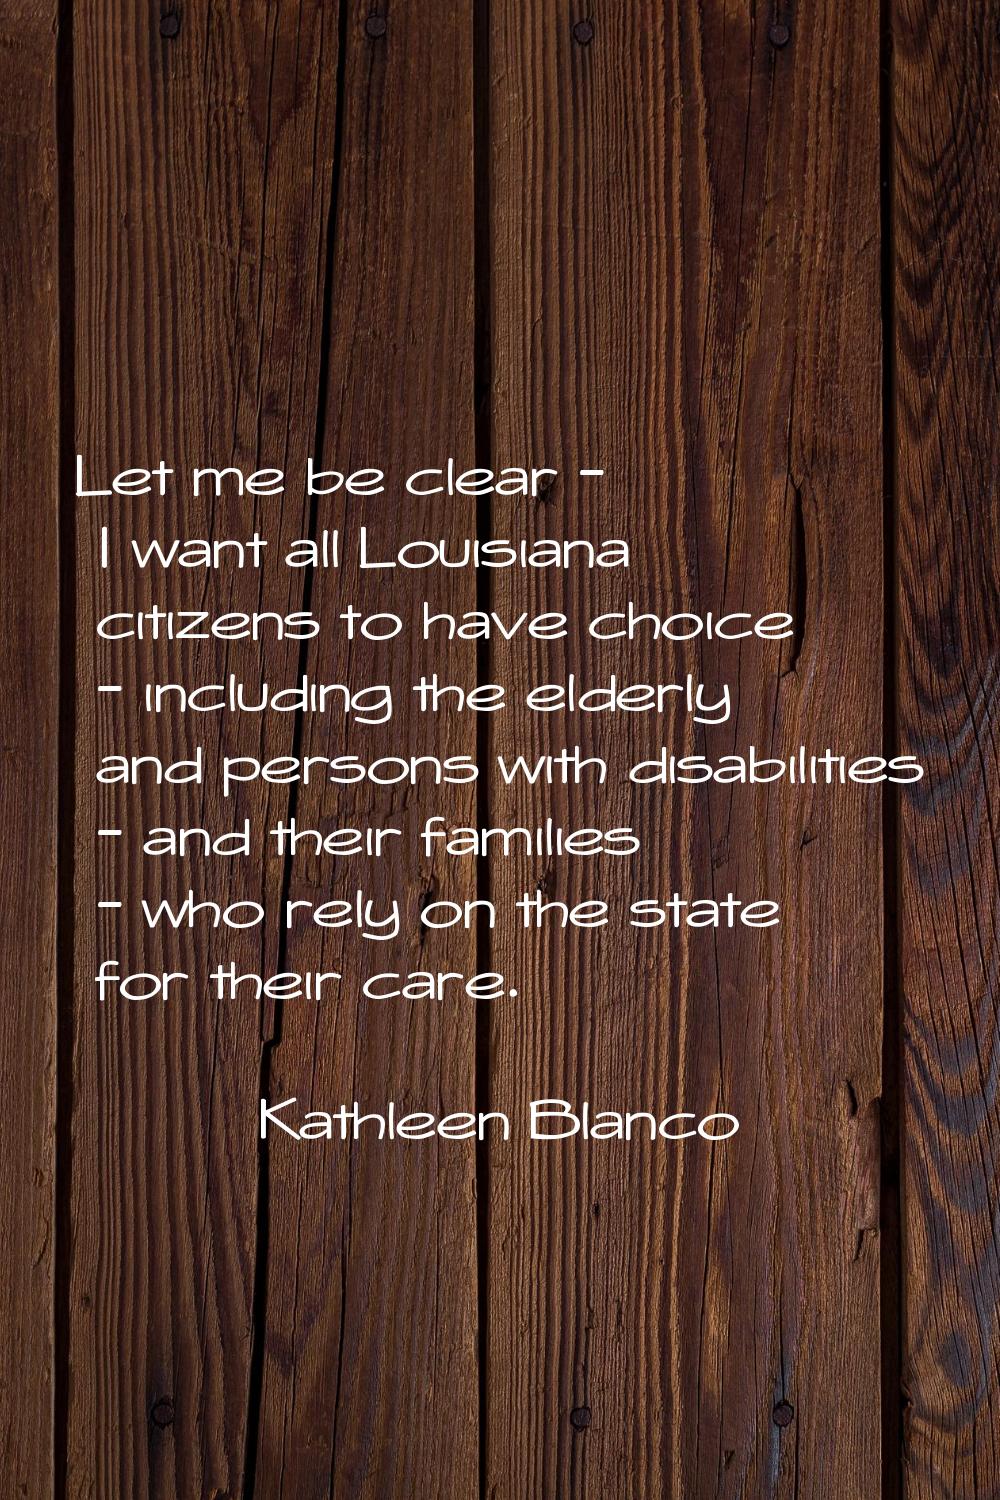 Let me be clear - I want all Louisiana citizens to have choice - including the elderly and persons 